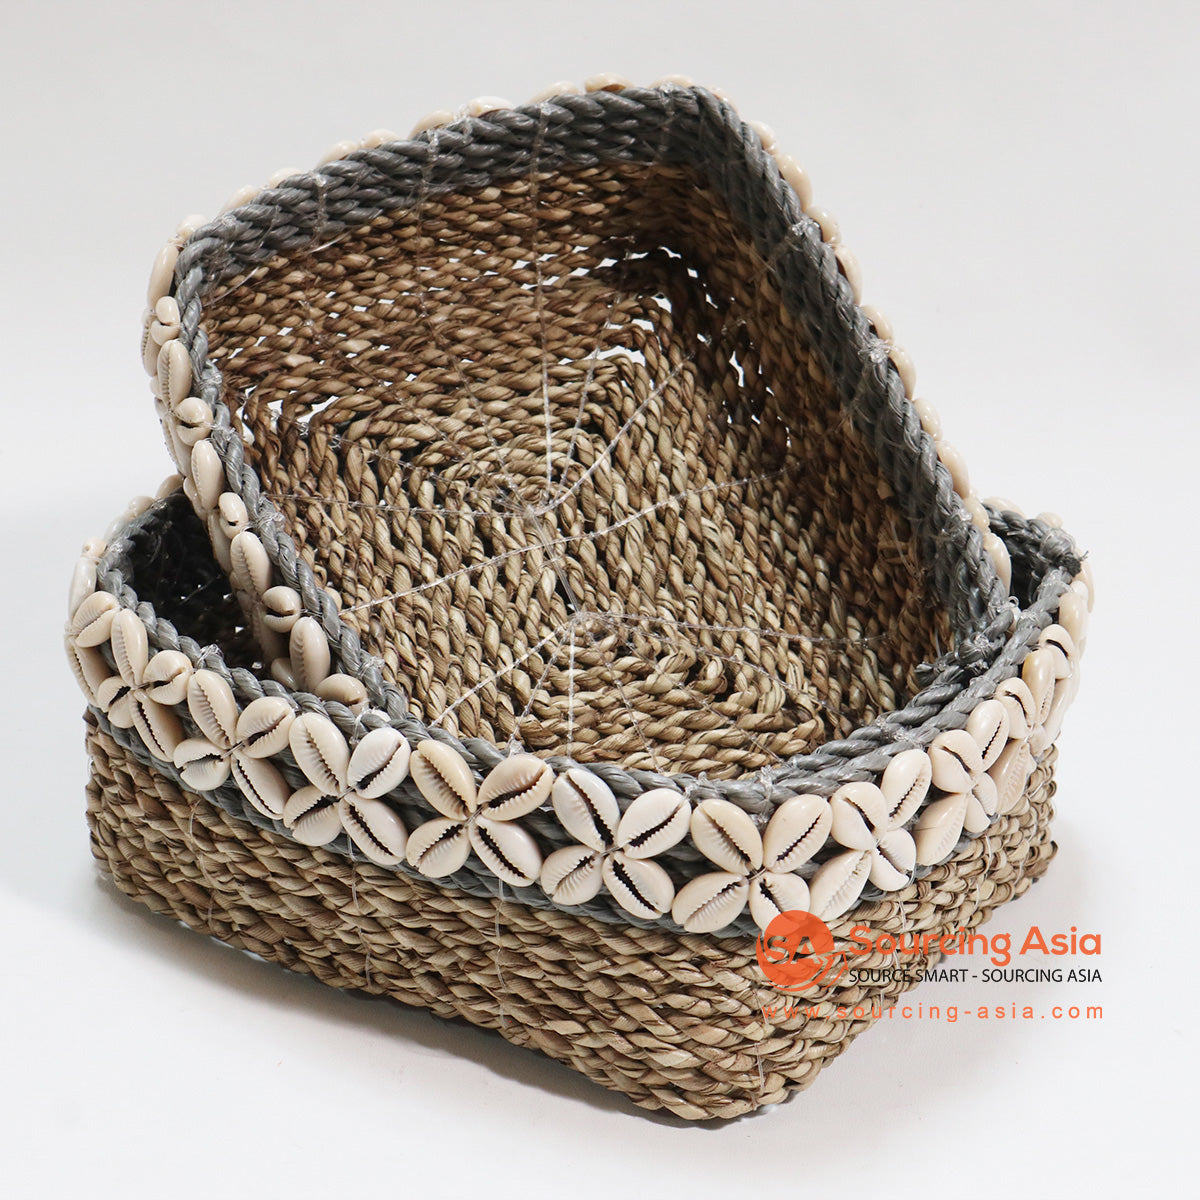 HBSC048-2 SET OF THREE NATURAL SEAGRASS SQUARE TRINKET BASKETS WITH SHELL